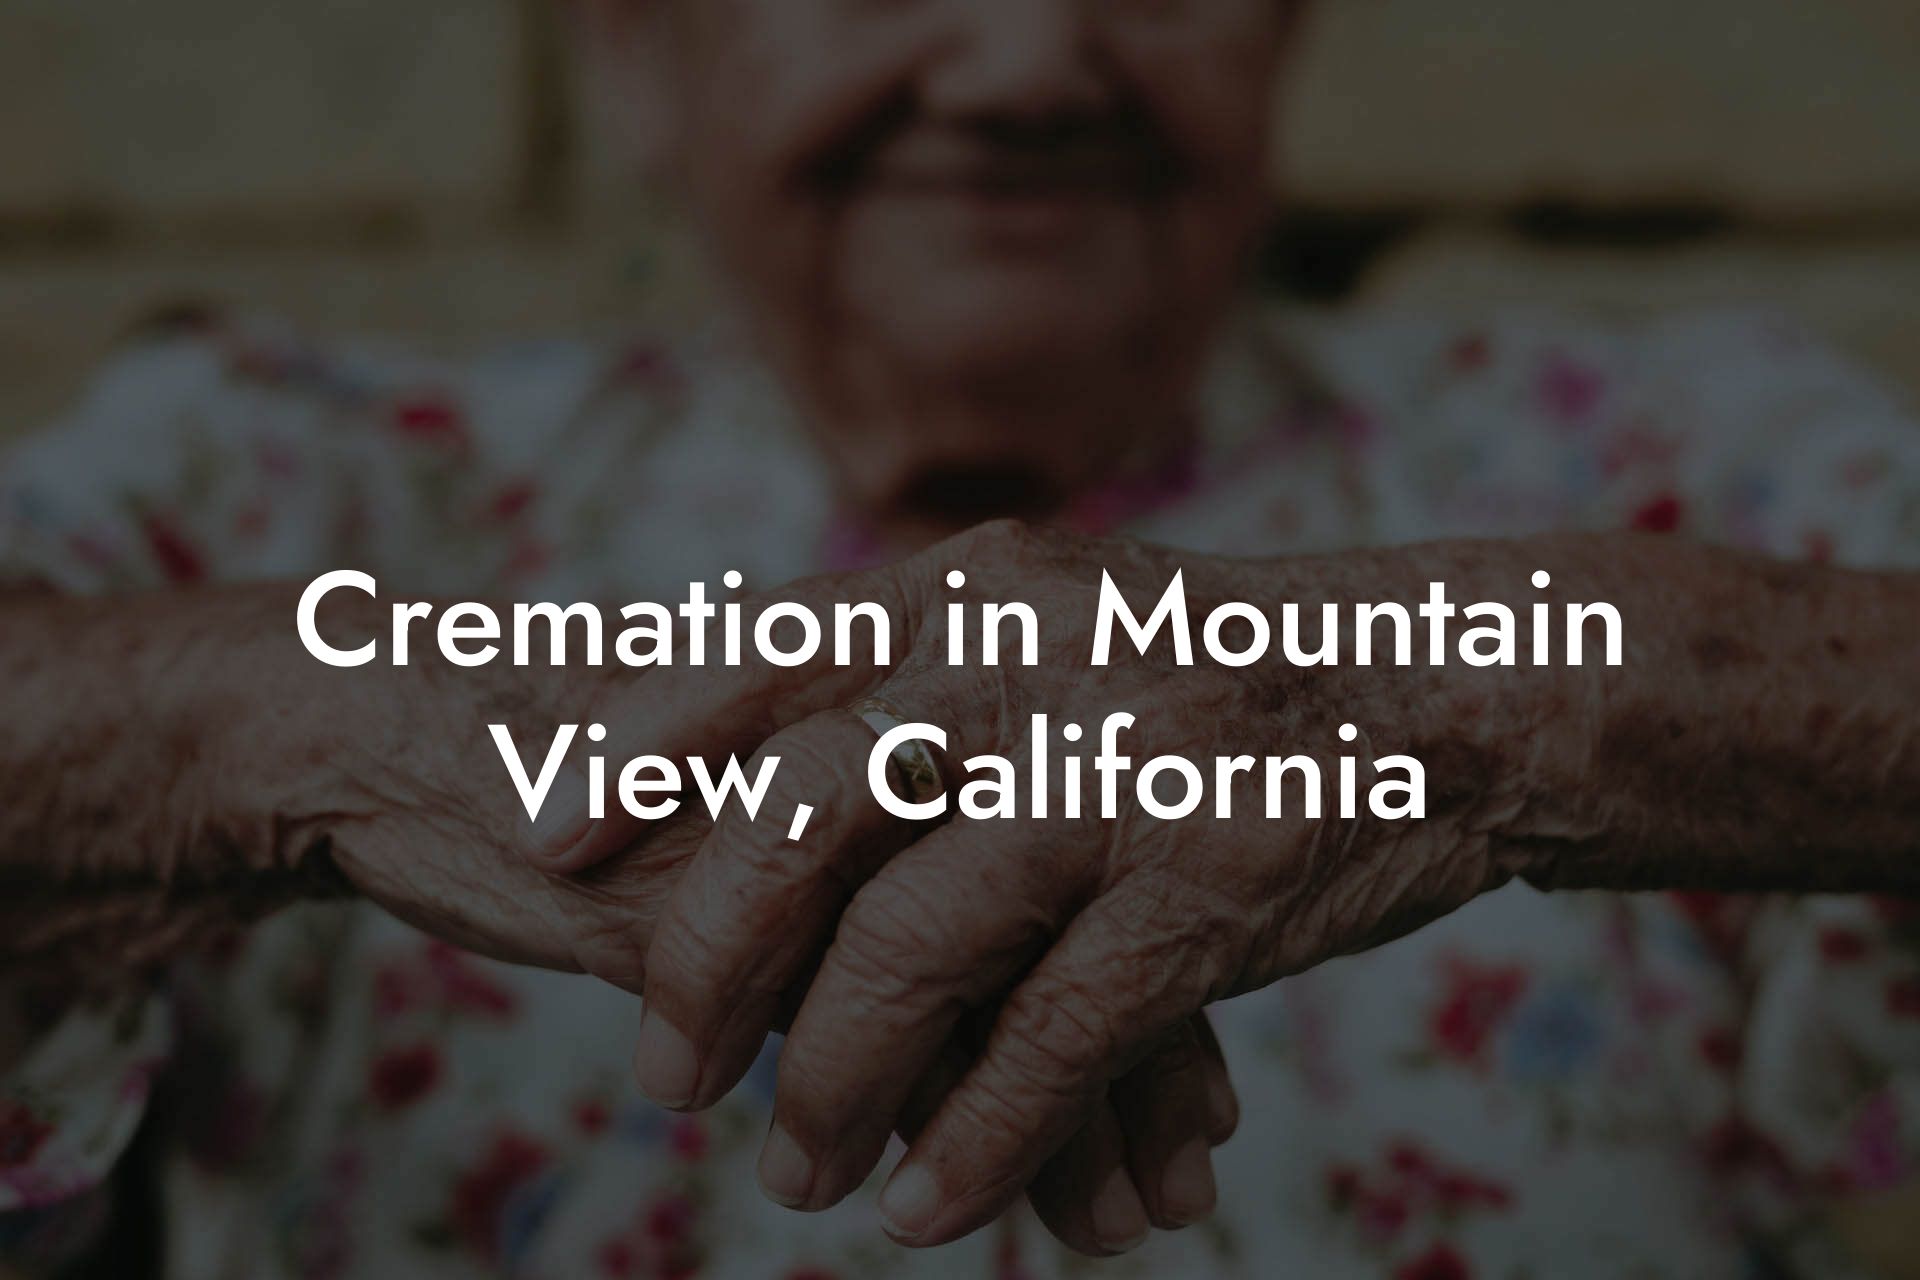 Cremation in Mountain View, California